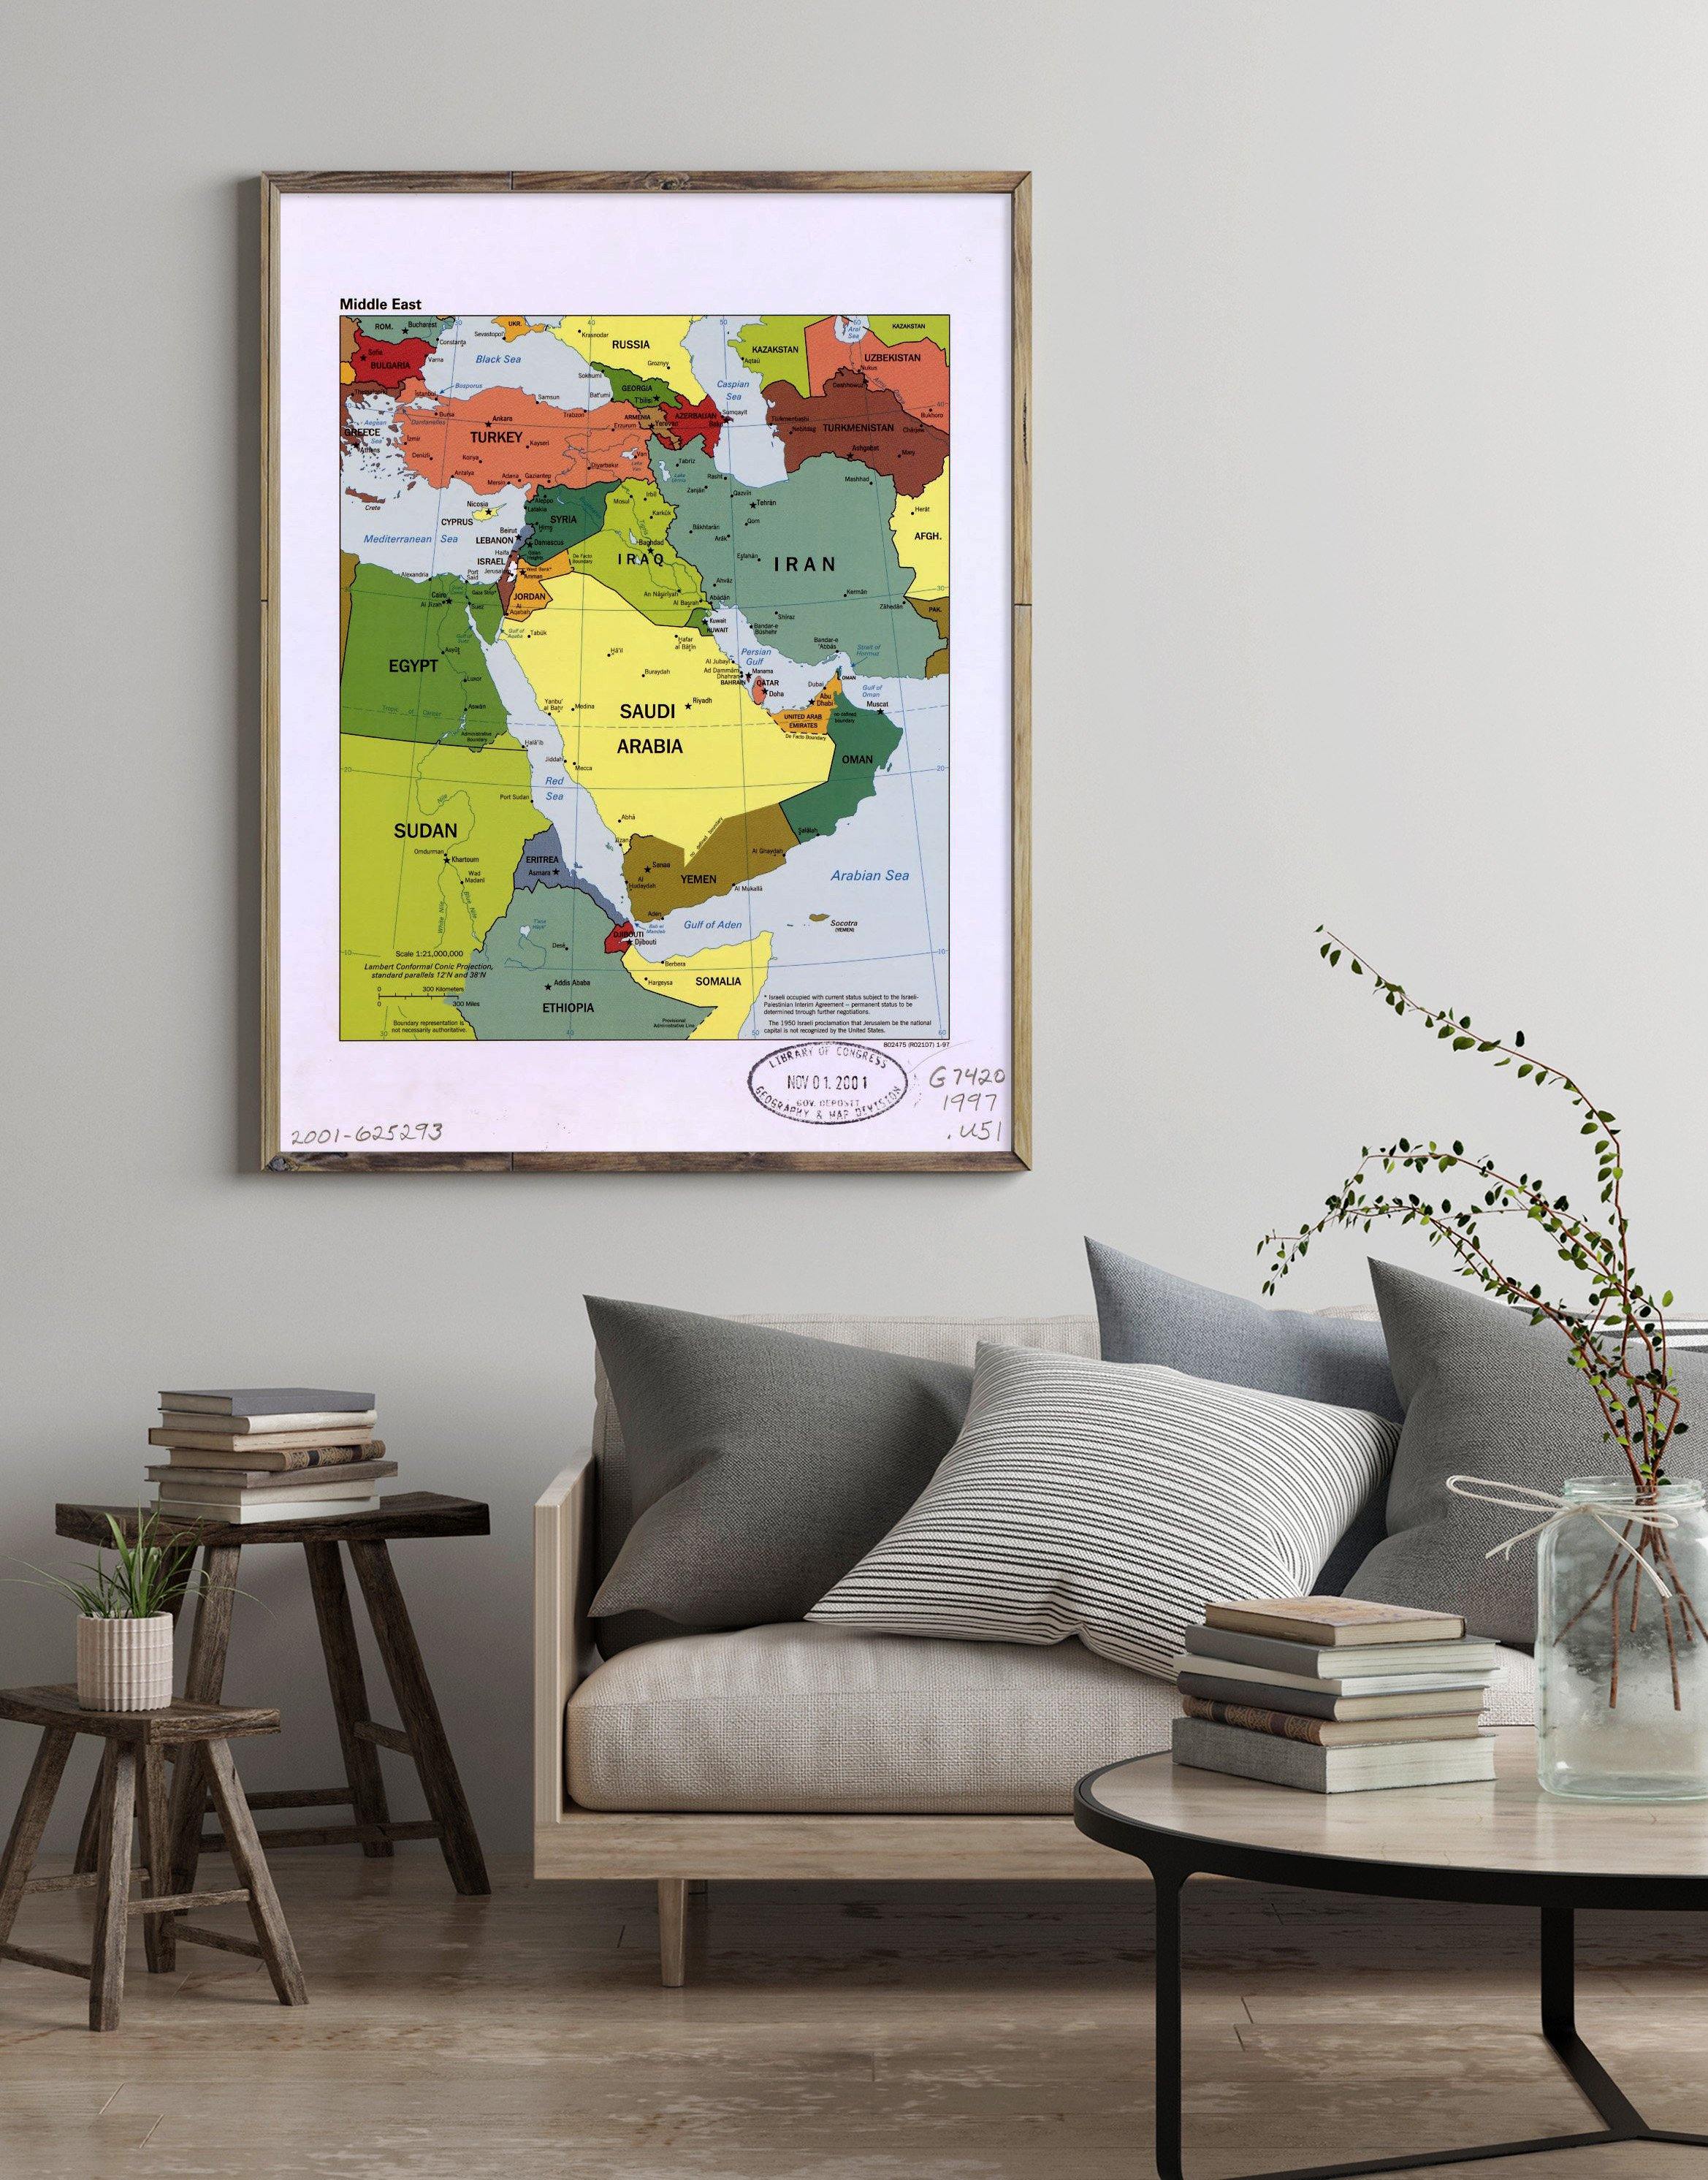 1997 Map| Middle East| Middle East Map Size: 18 inches x 24 inches |Fi - New York Map Company